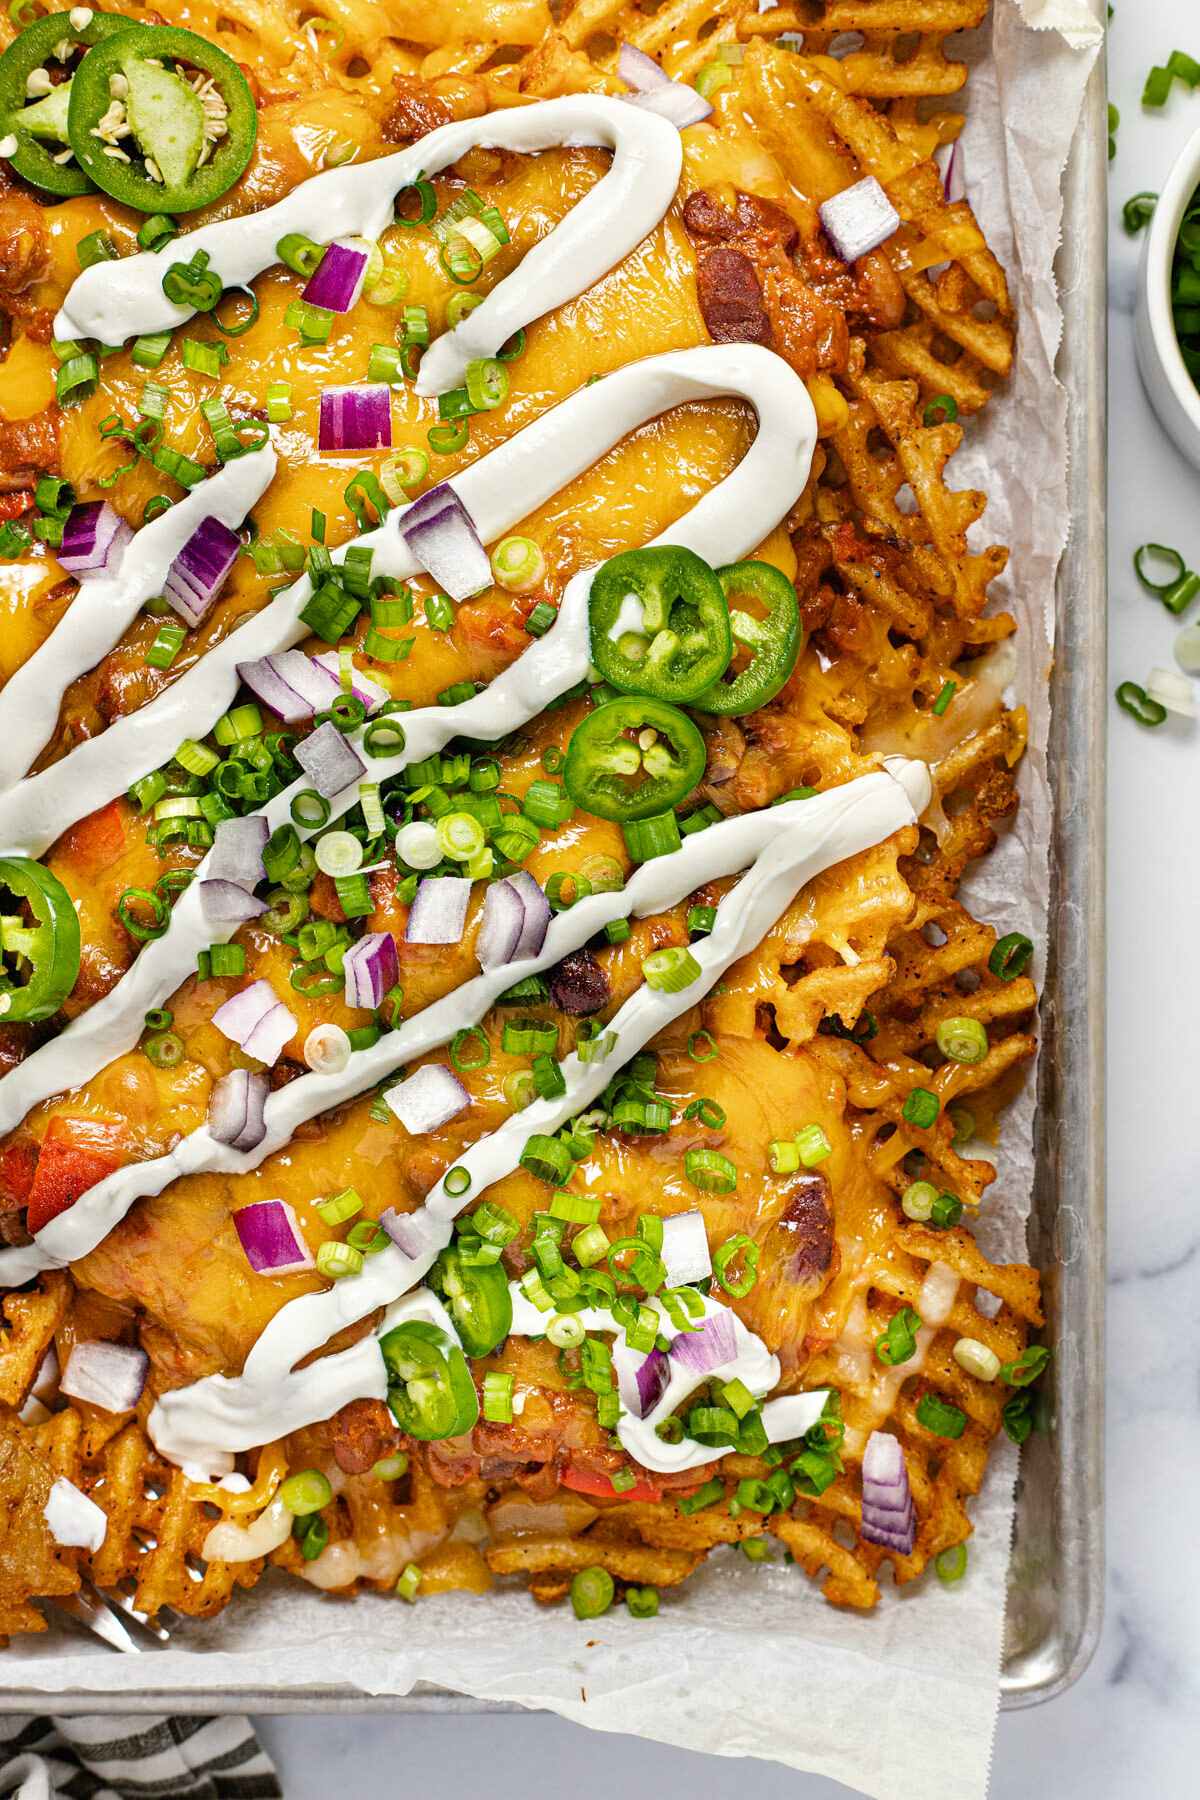 Overhead shot of chili cheese fries on a baking sheet drizzled with sour cream and garnished with green onion